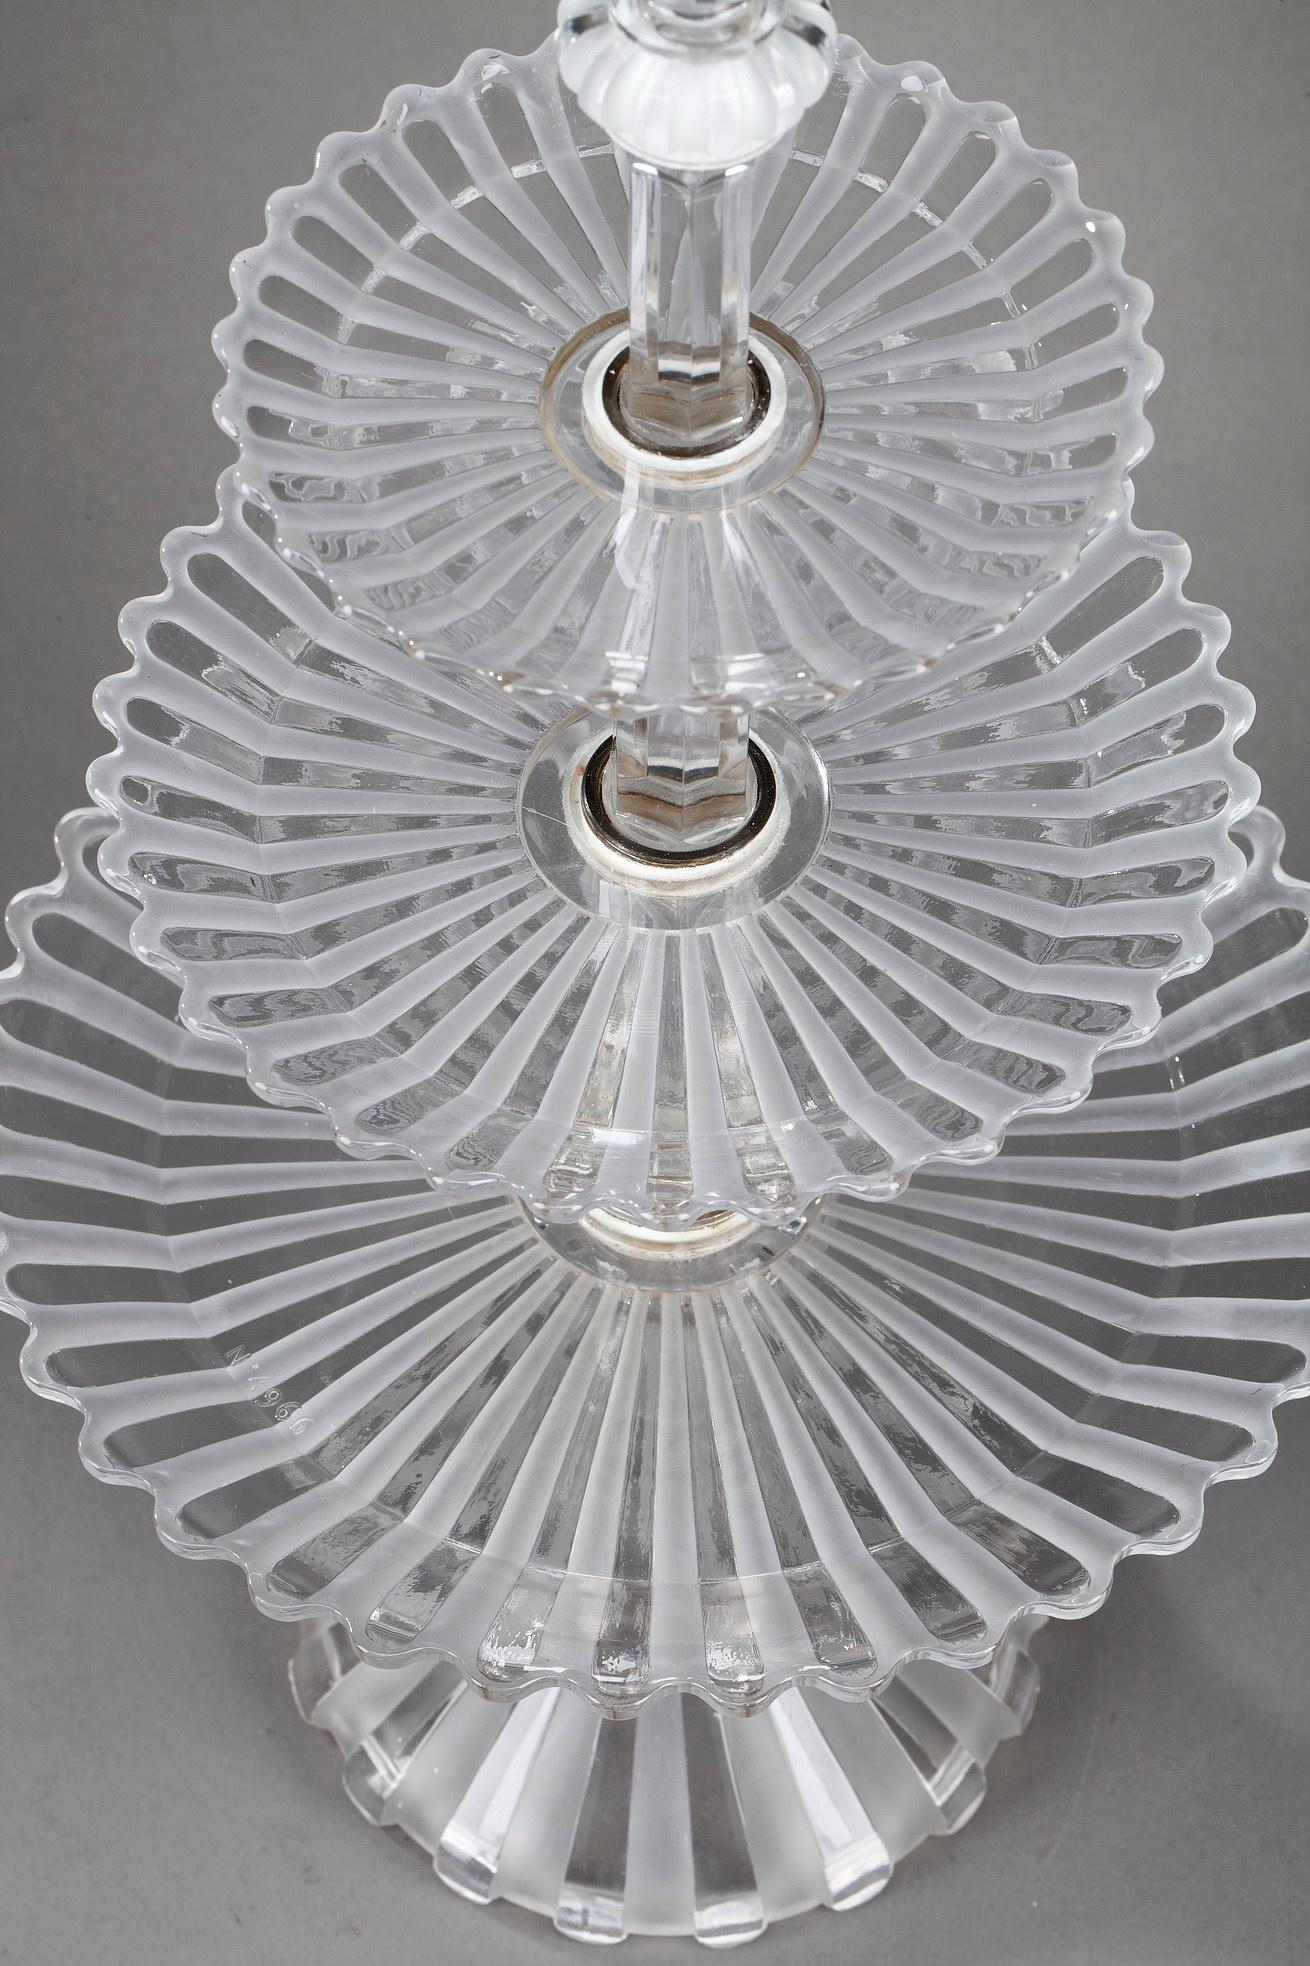 Baccarat Crystal Centerpiece, Late 19th Century Period 8